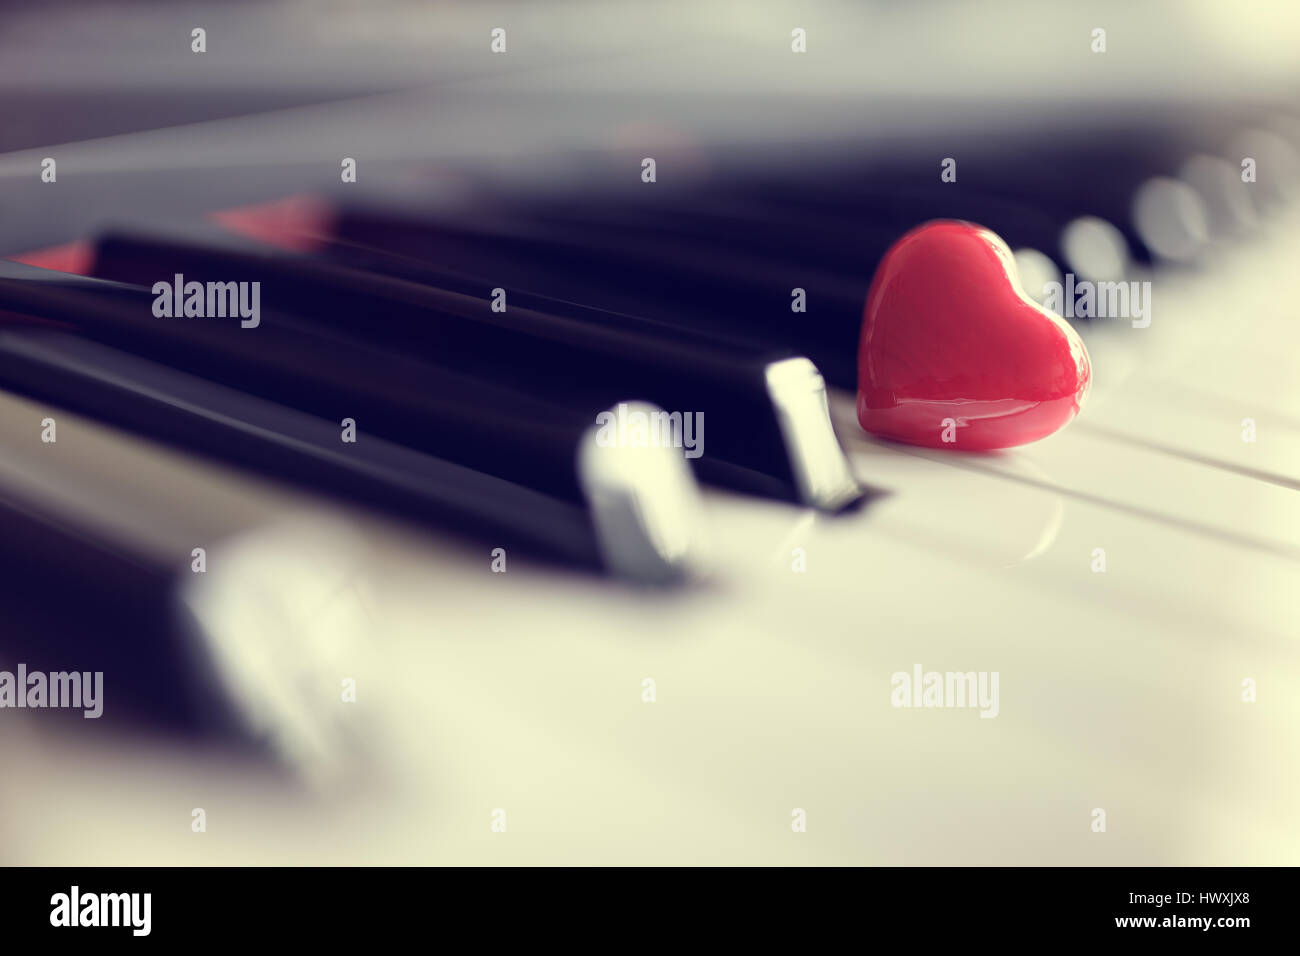 Red Heart On Piano Keyboard Keys Concept For Love Of Music Or Romance Stock Photo Alamy